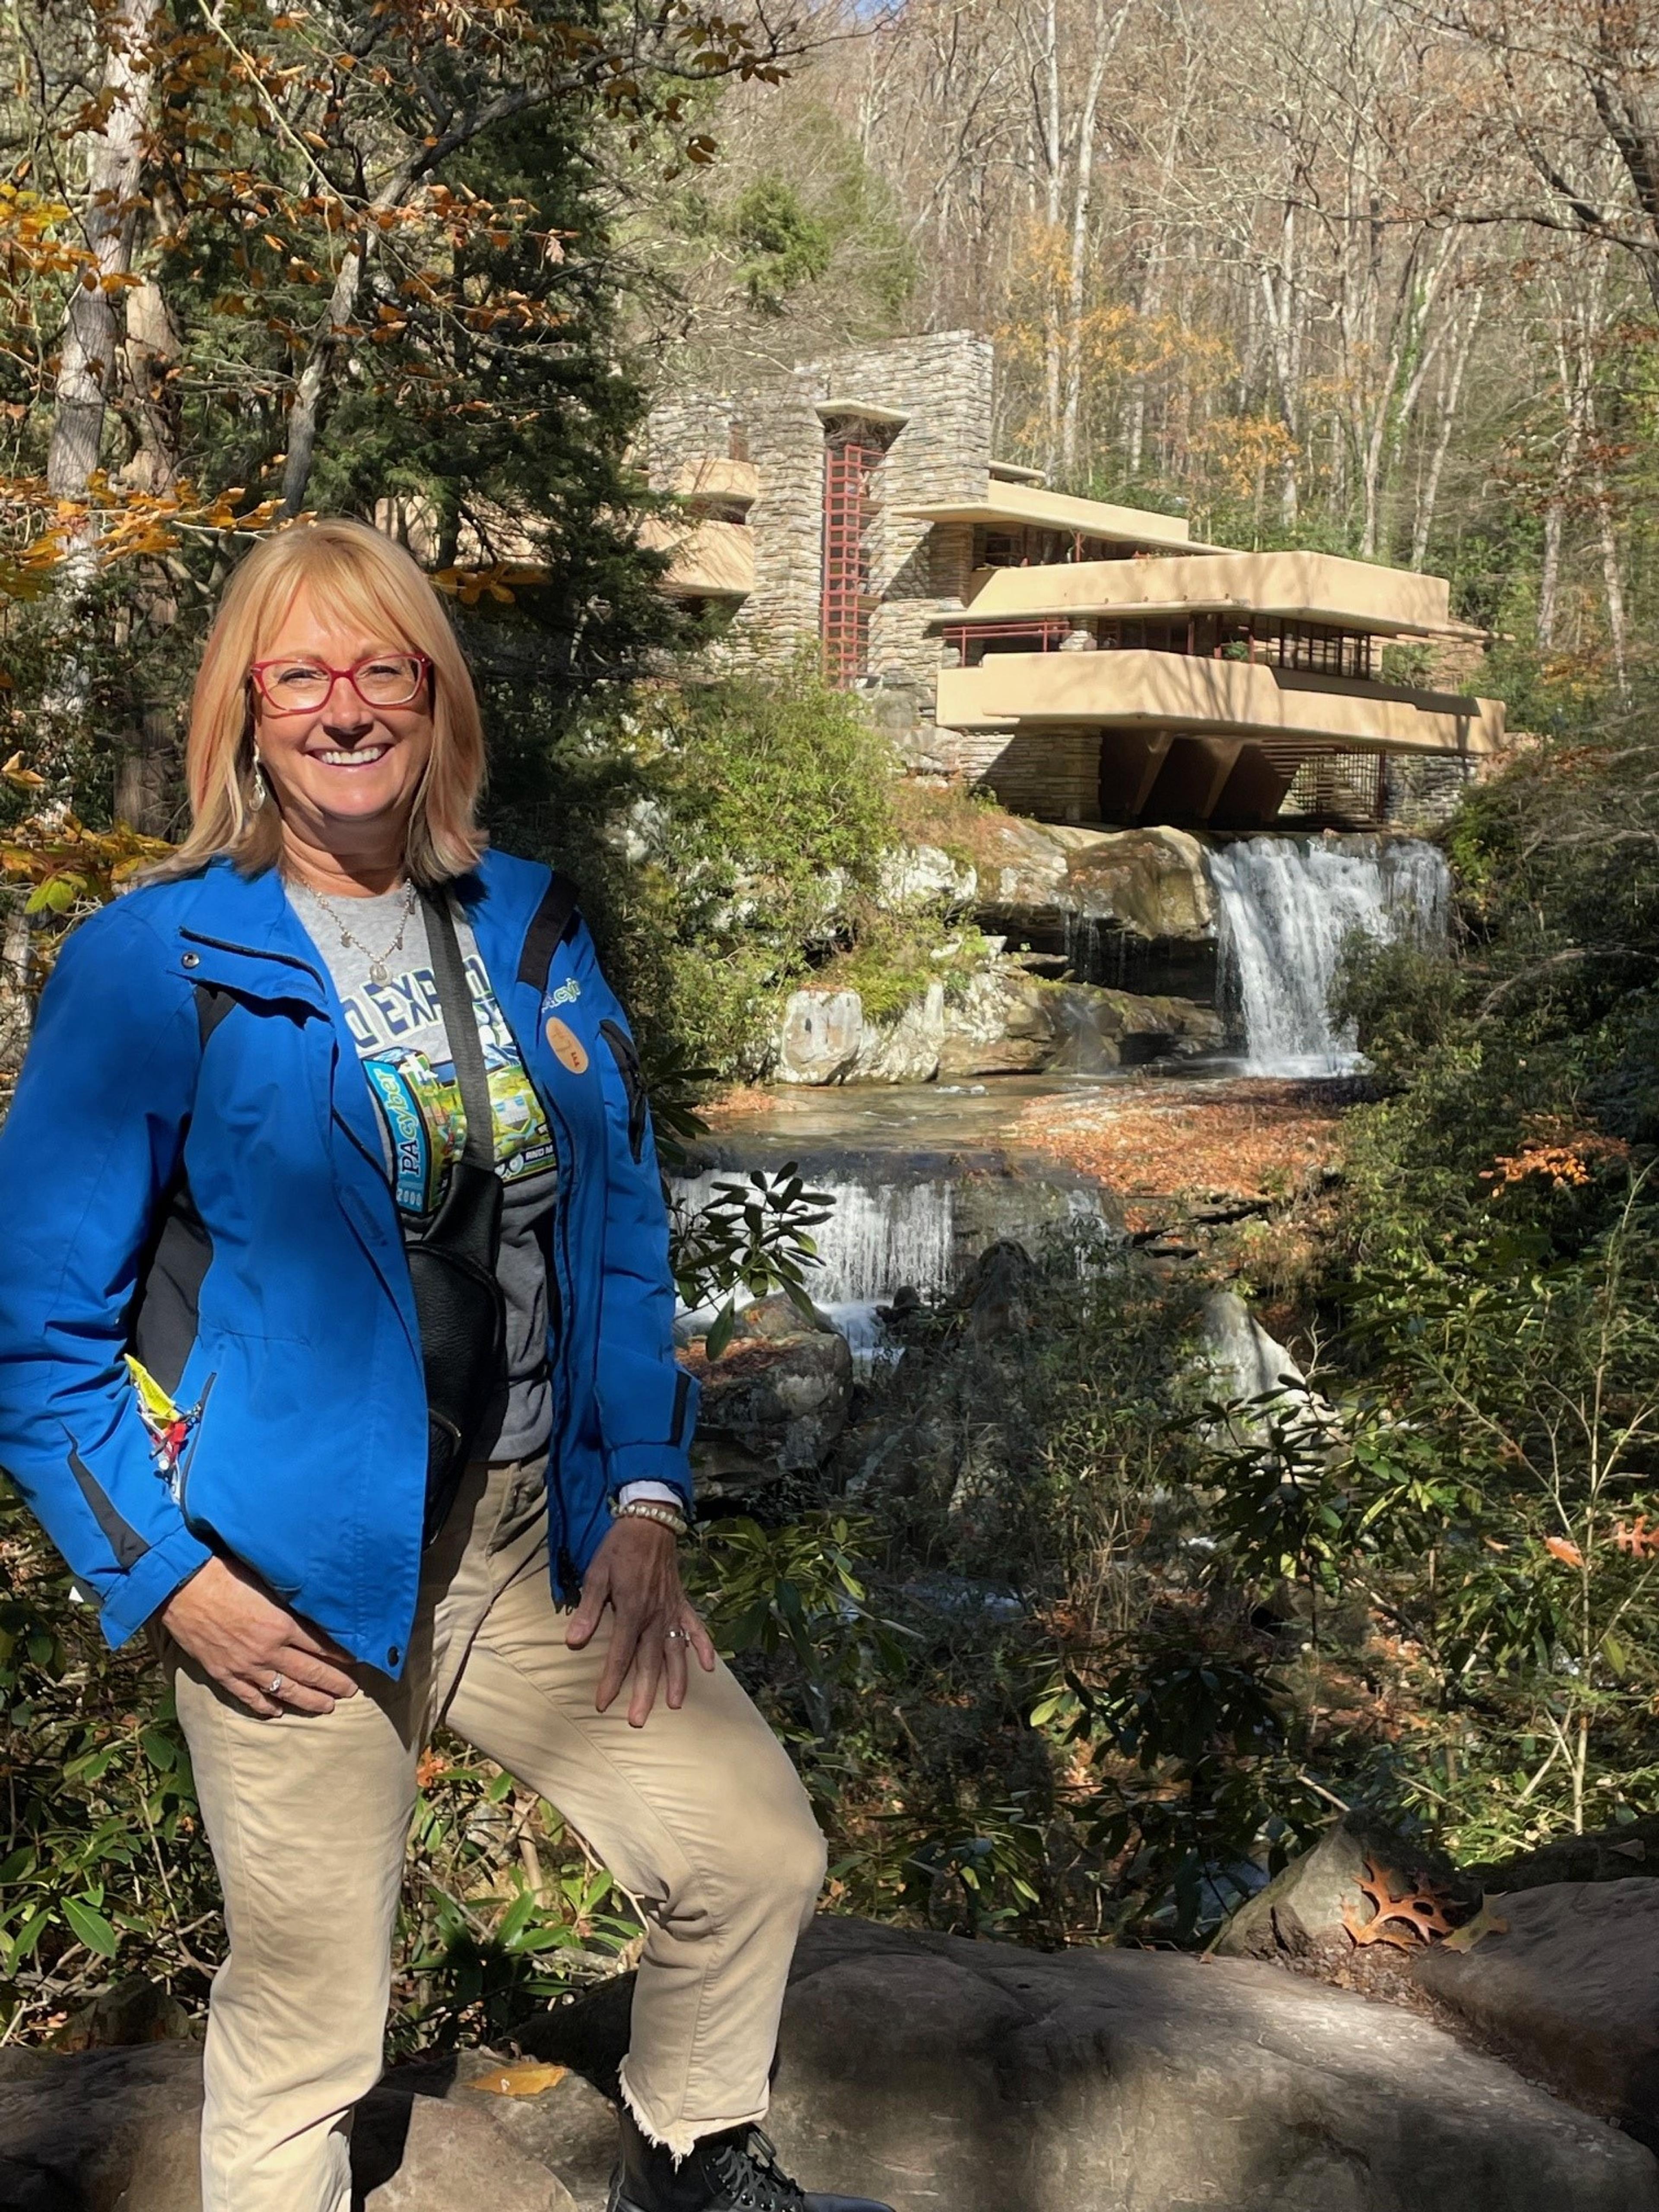 Jane is wearing a blue jacket and Wright's Fallingwater is in the background.